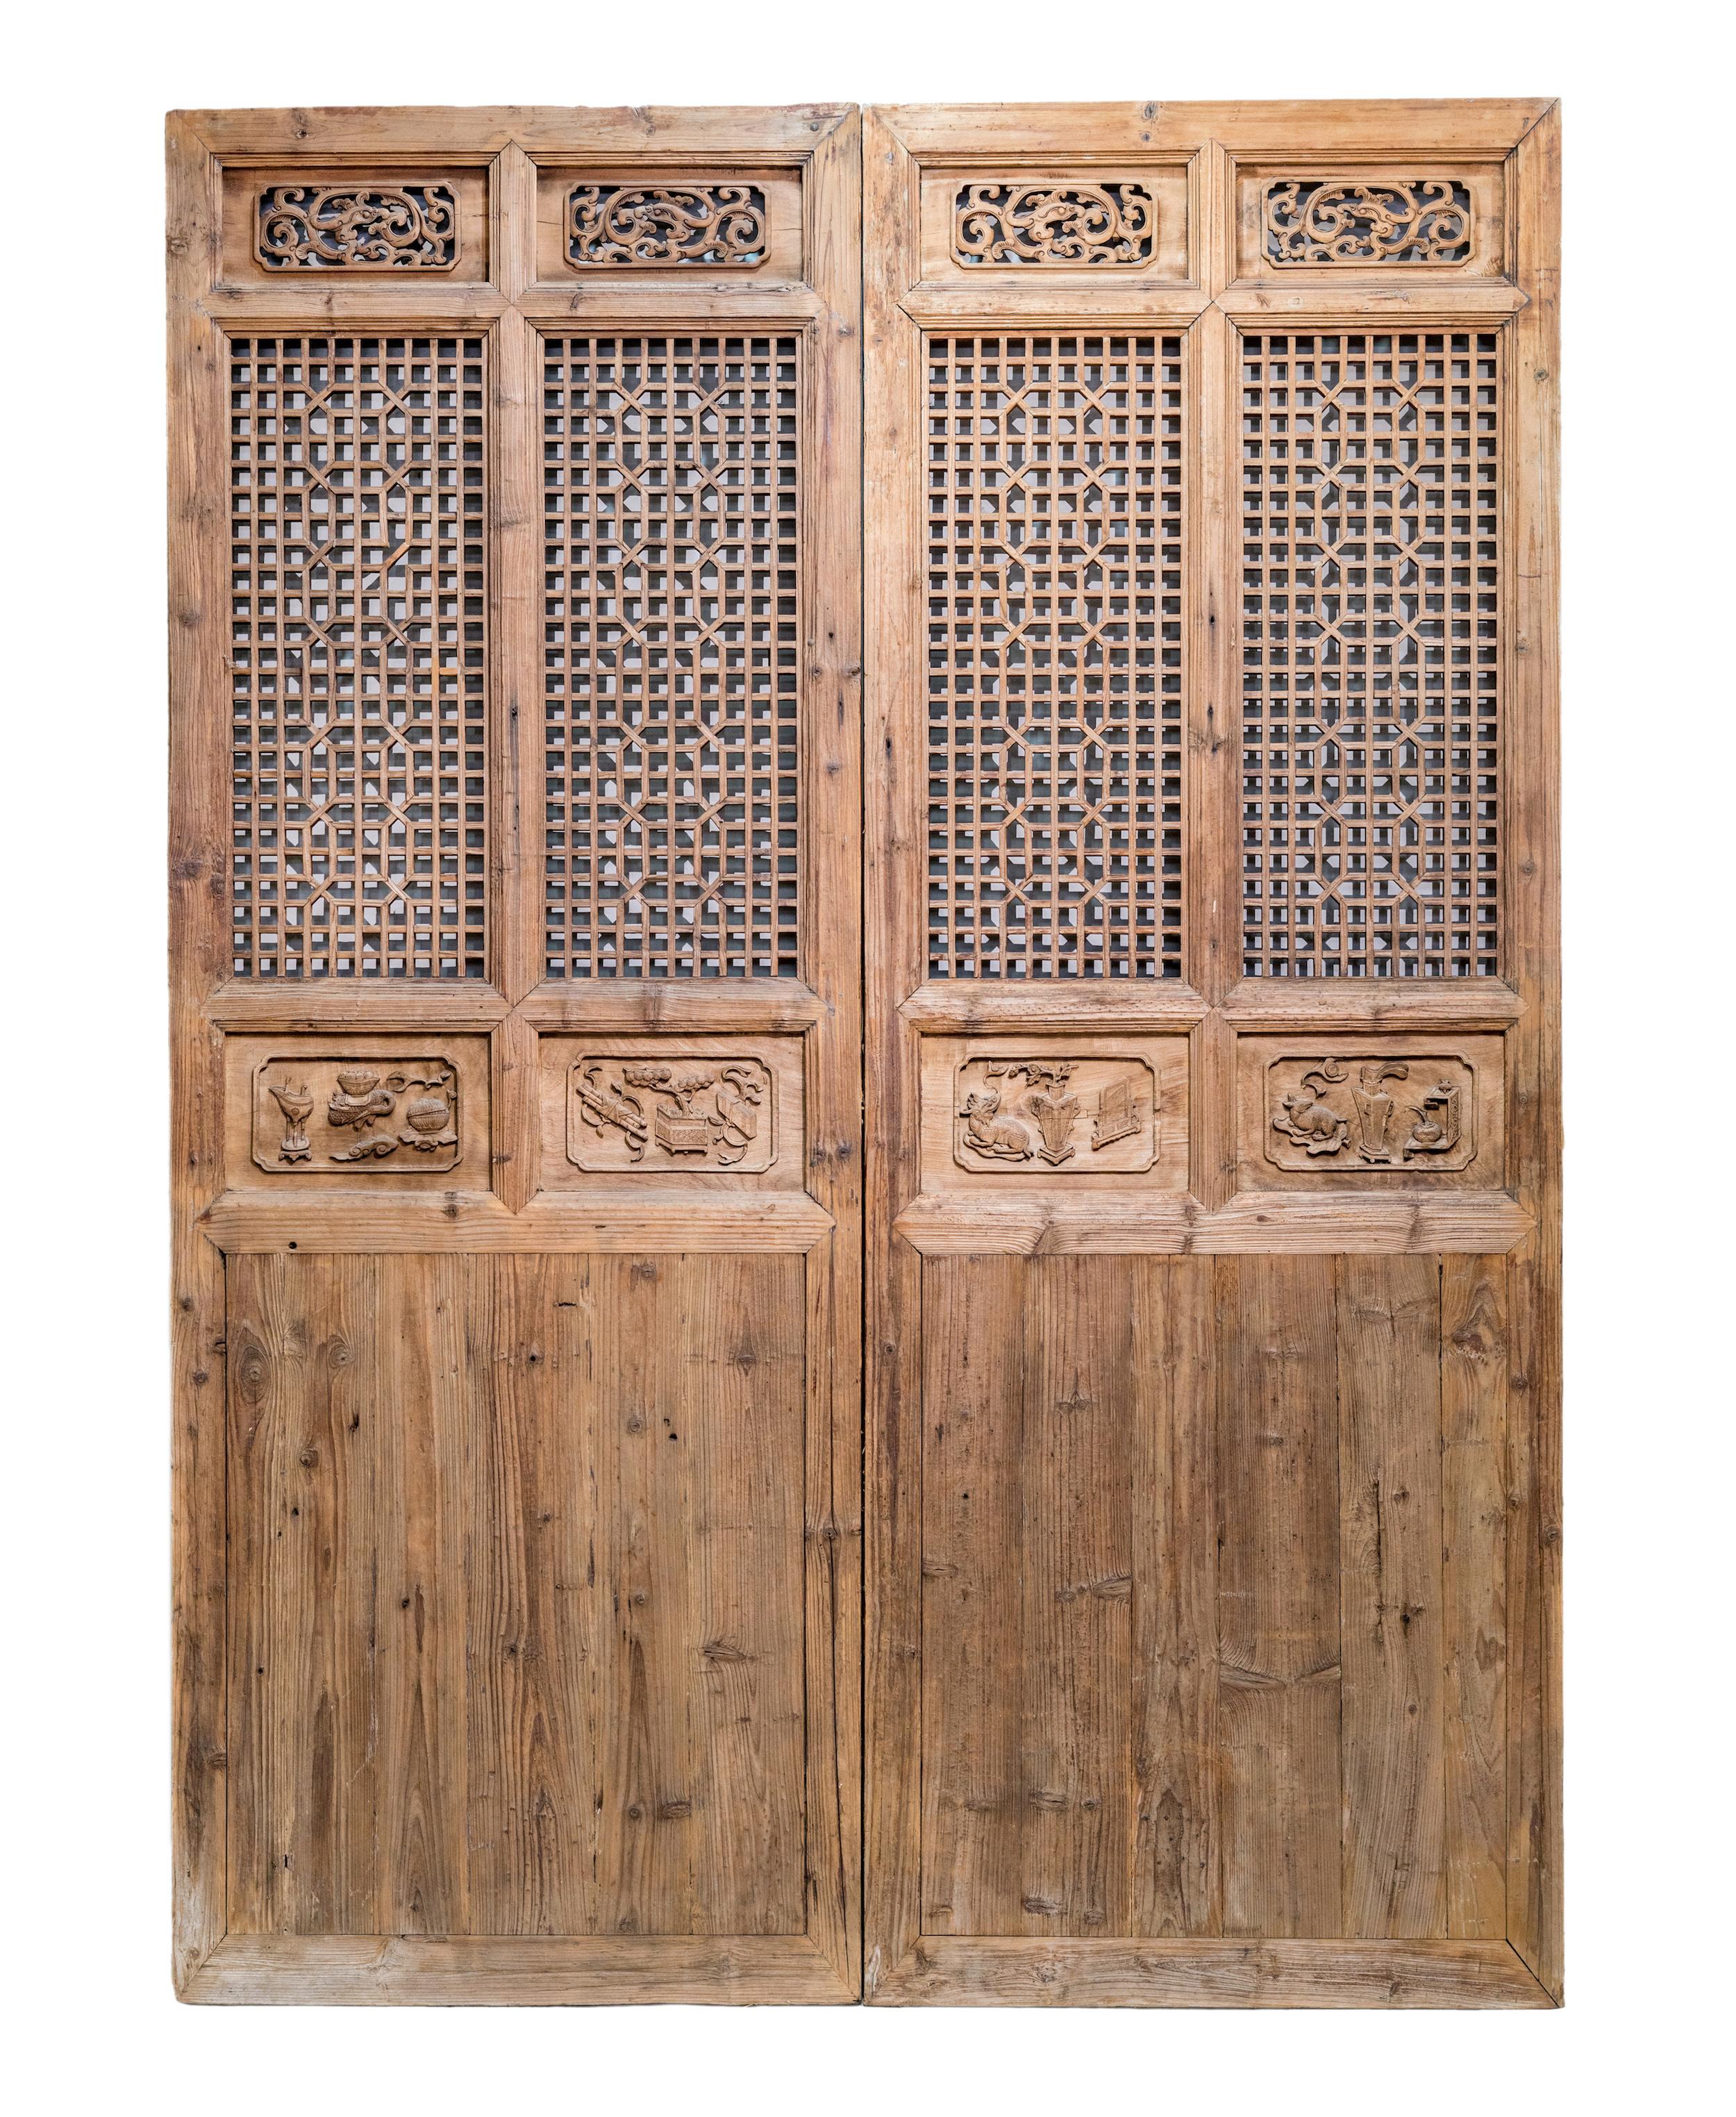 Late 19th century double-width door panels from Zhejiang province, China. The framework and plain bottom panels are made of fir wood, while the latticework portion is made of Elm wood. The middle carvings are made of Camphor wood, and have very deep